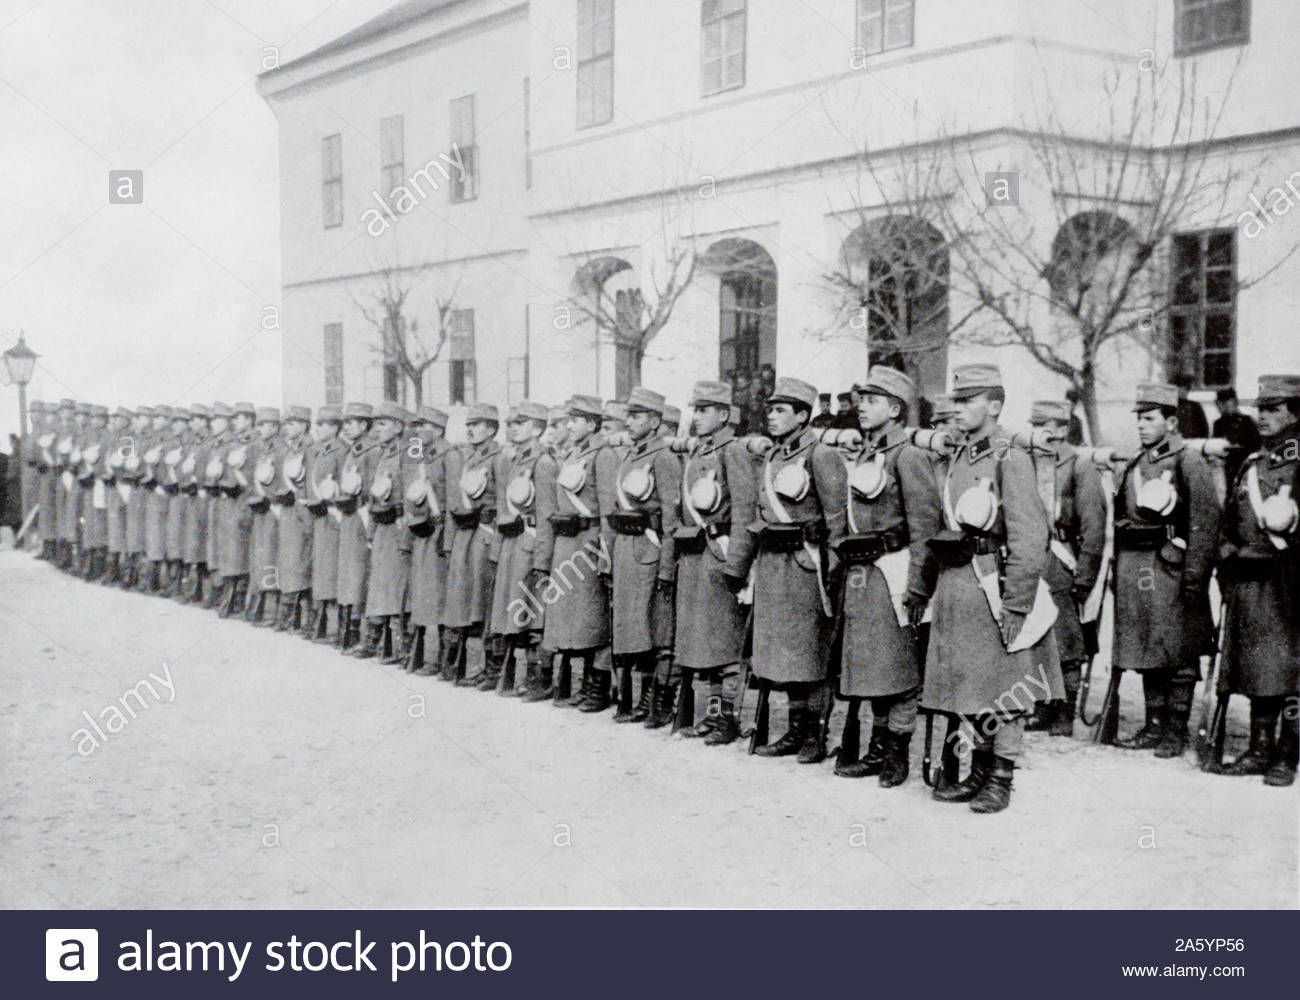 WW1 Serbian Army troops on parade, vintage photograph from 1914 Stock Photo